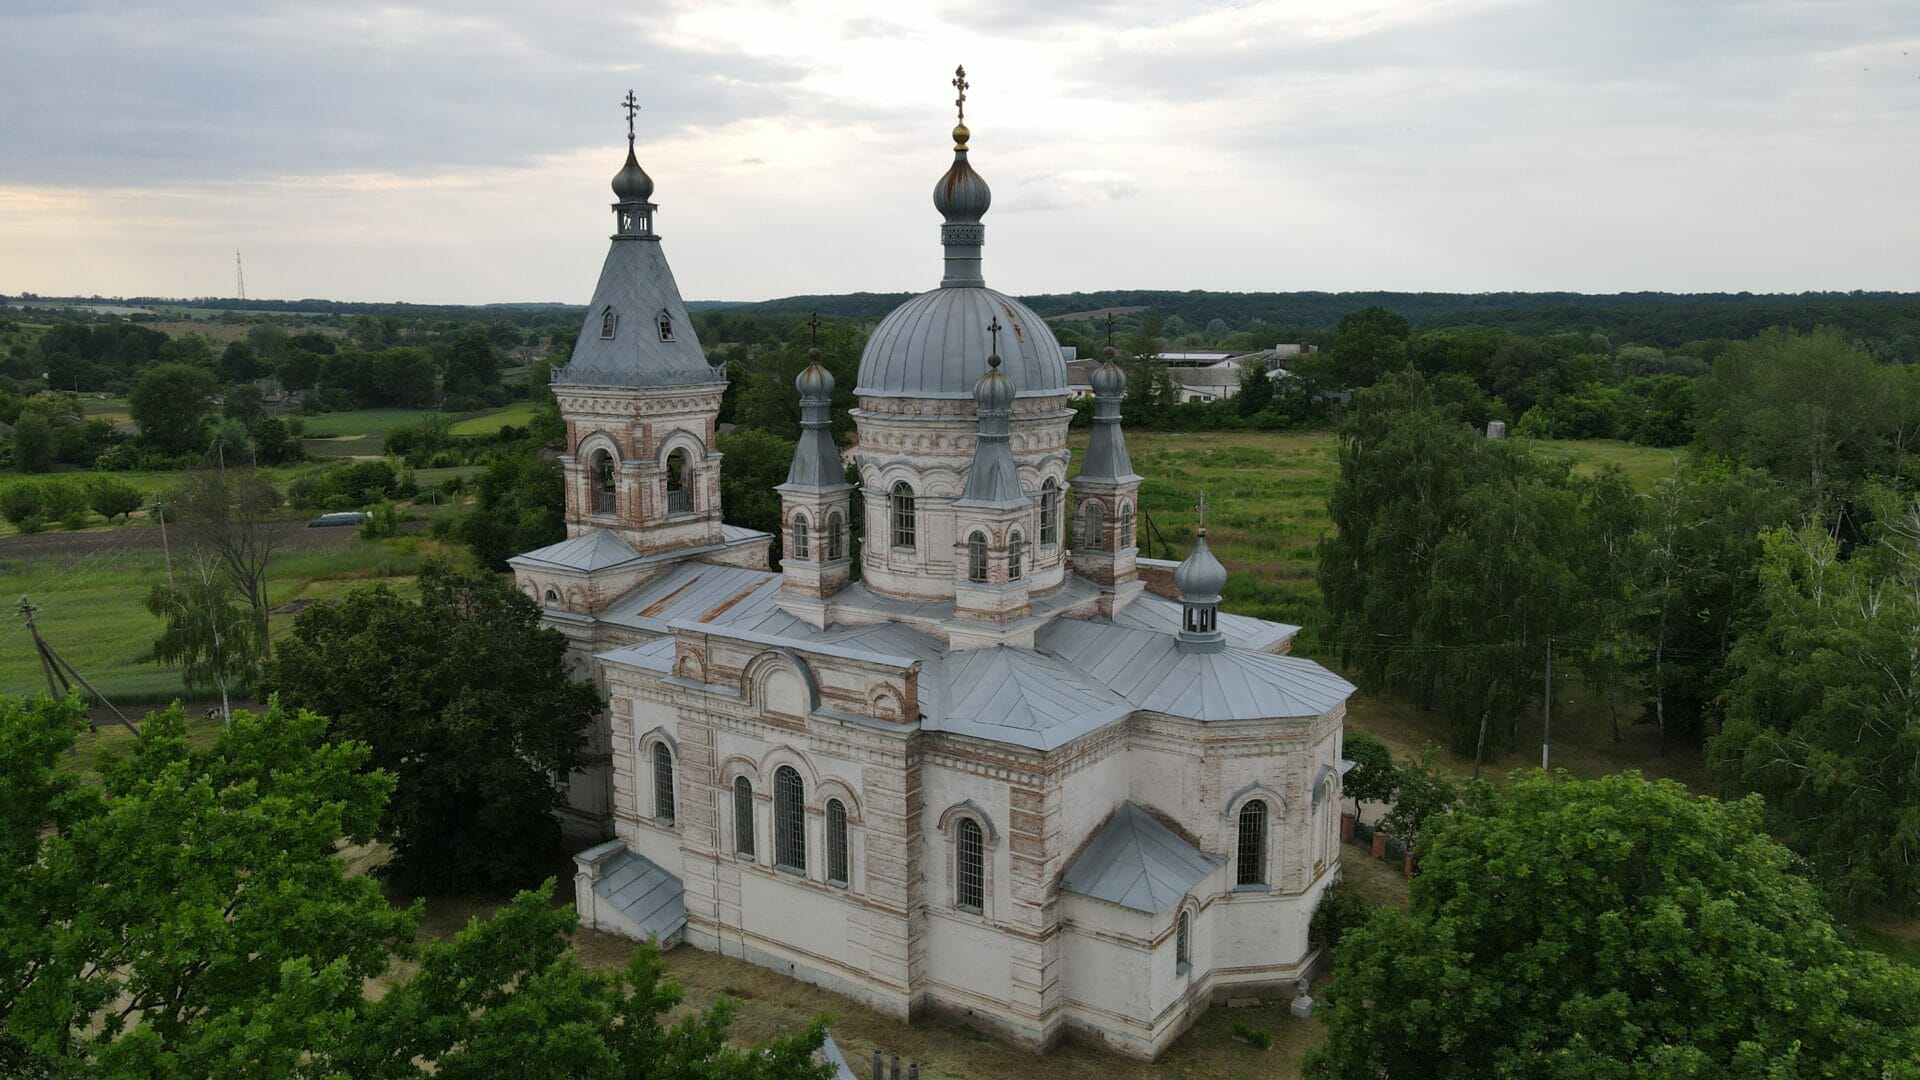 Church of the Intercession of the Most Holy Mother of God